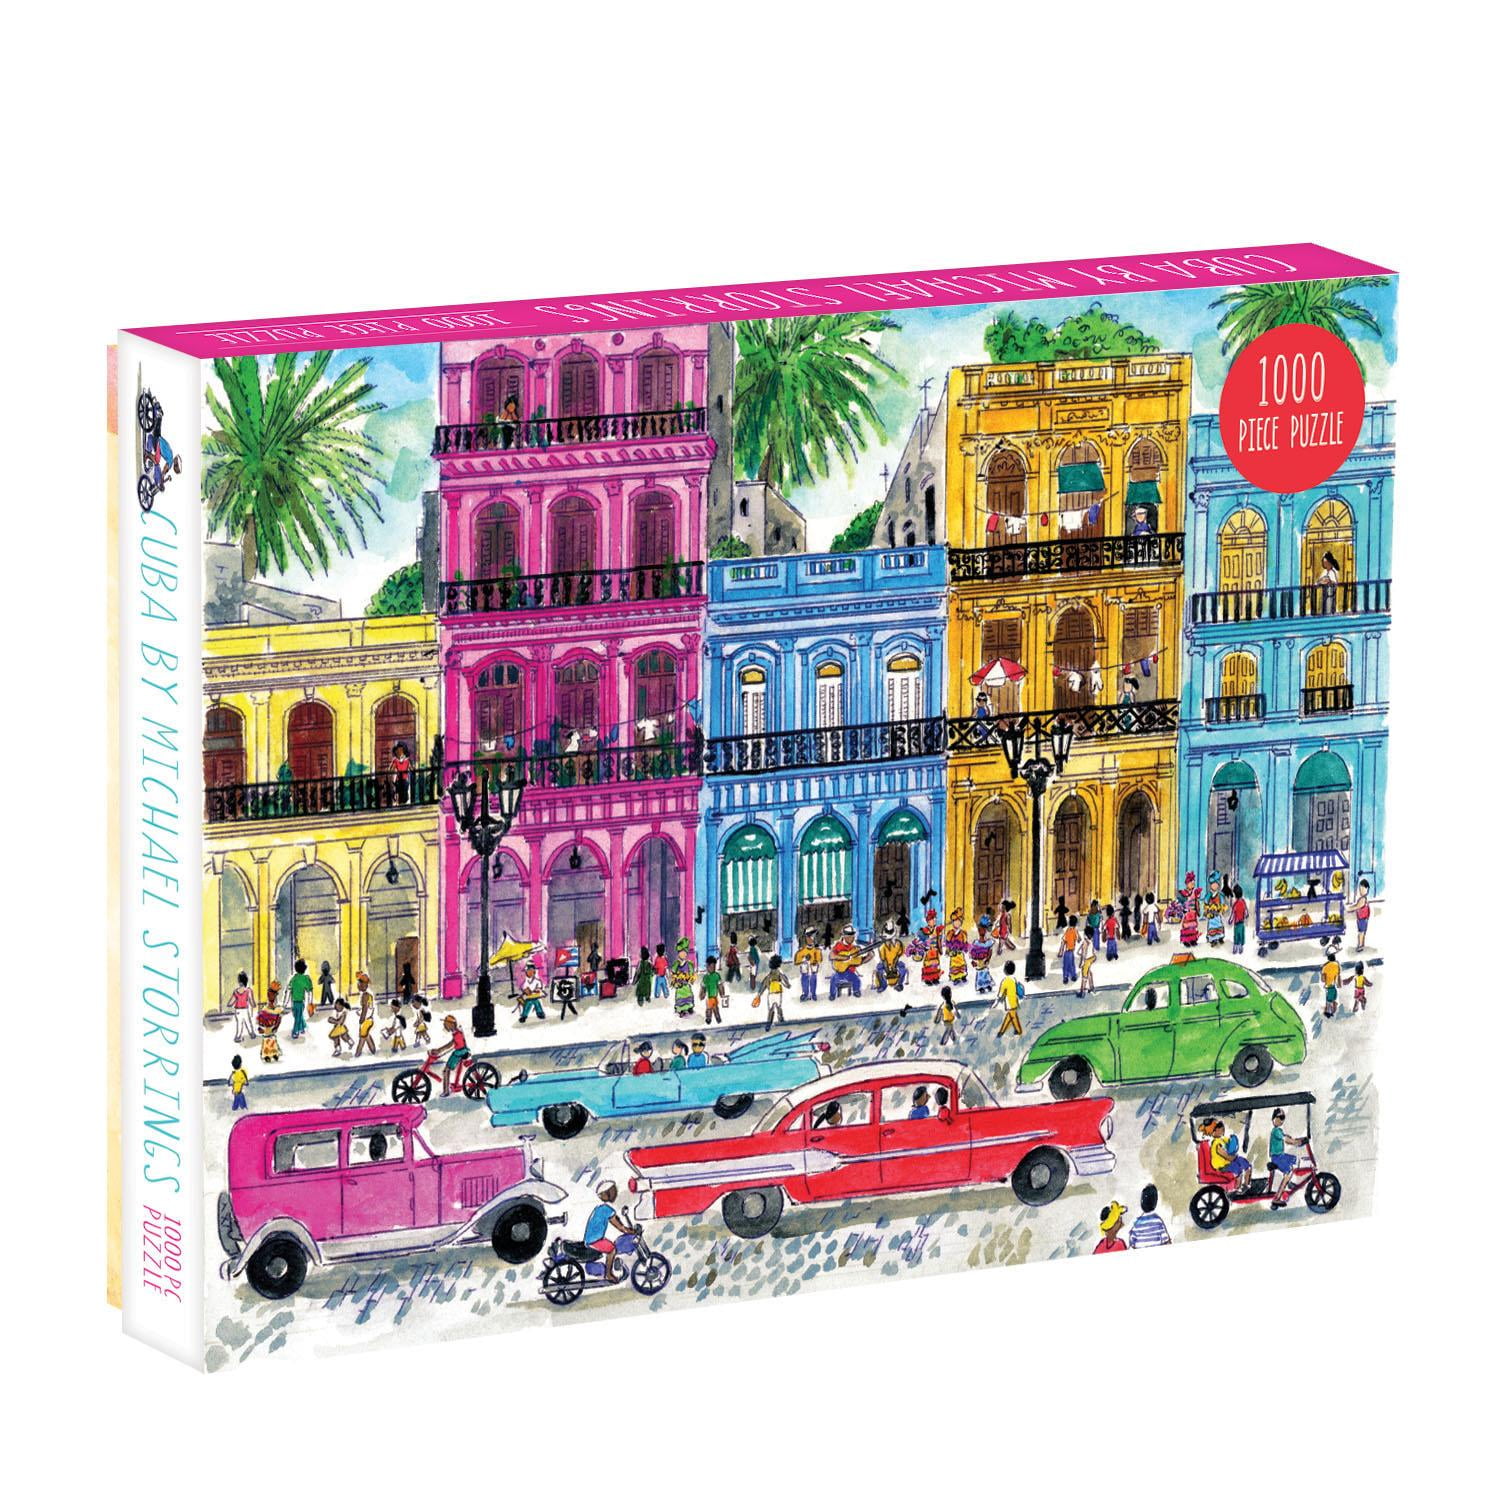 for sale online 2017, Game Michael Storrings Spring on Park Avenue 1000 Piece Puzzle 